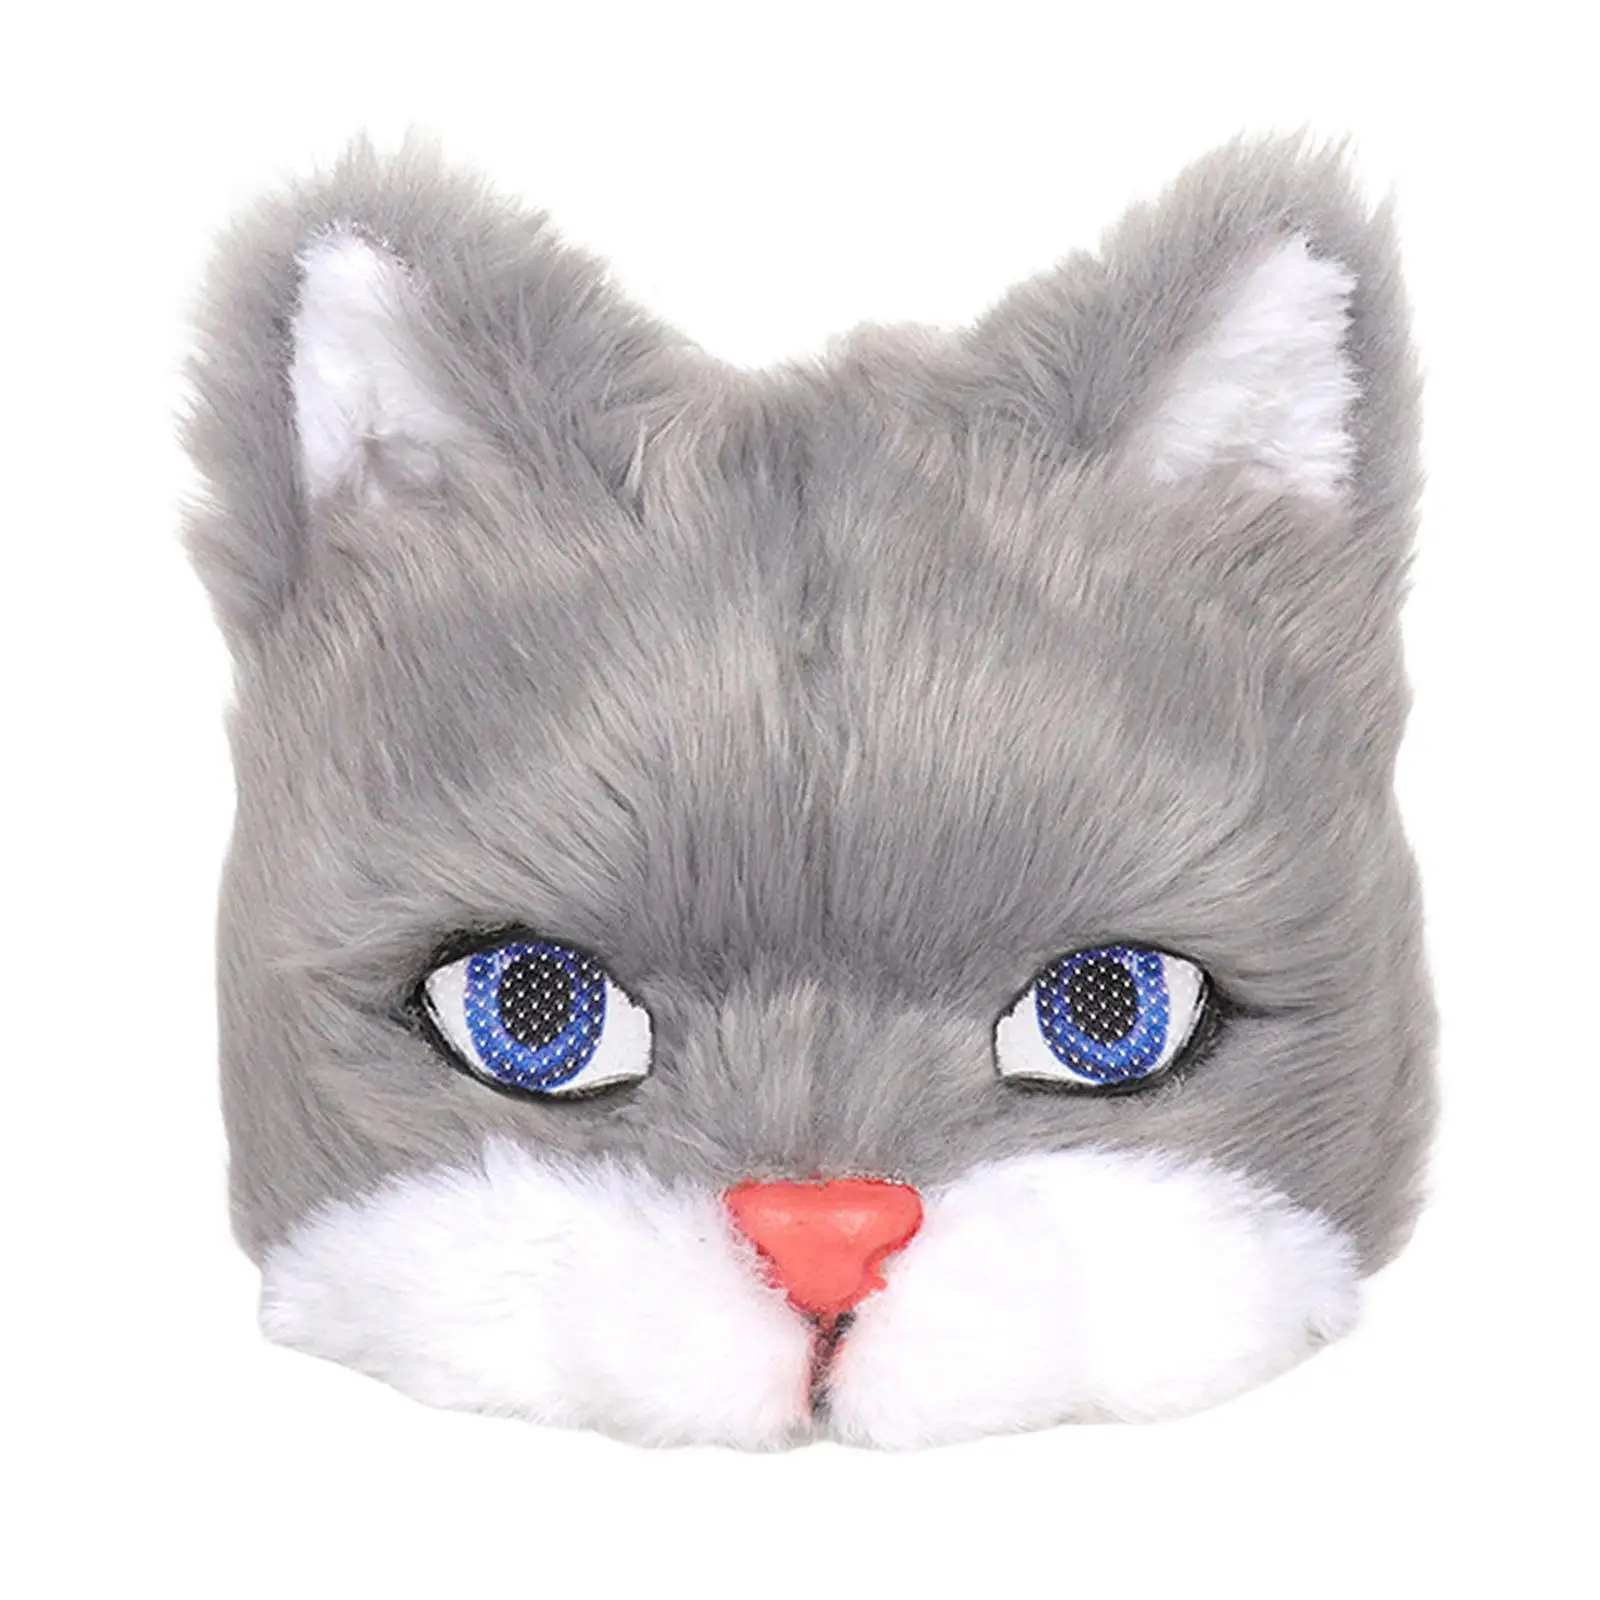 Cat Mask Half Face Animal Mask Simulation Mask for Kids Adults for Role Play Party Masquerade Halloween Photo Prop